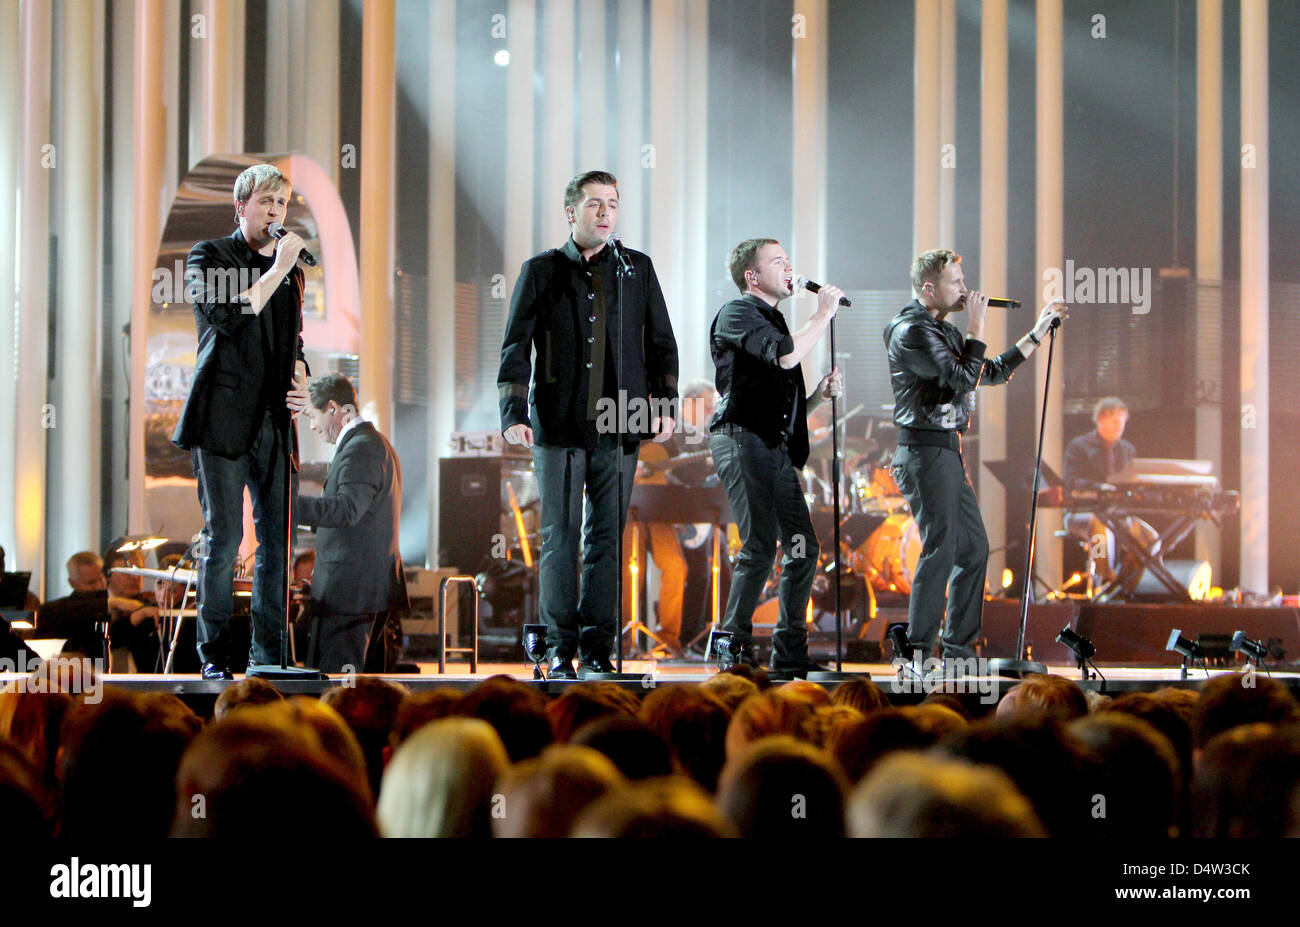 The band Westlife performs during the Nobel Peace Prize Concert at the Oslo Spektrum in Oslo, Norway, 11 December 2009. The concert honours this year's Nobel Peace Prize laureate Barack Obama, President of the United States. Photo: Patrick van Katwijk Stock Photo